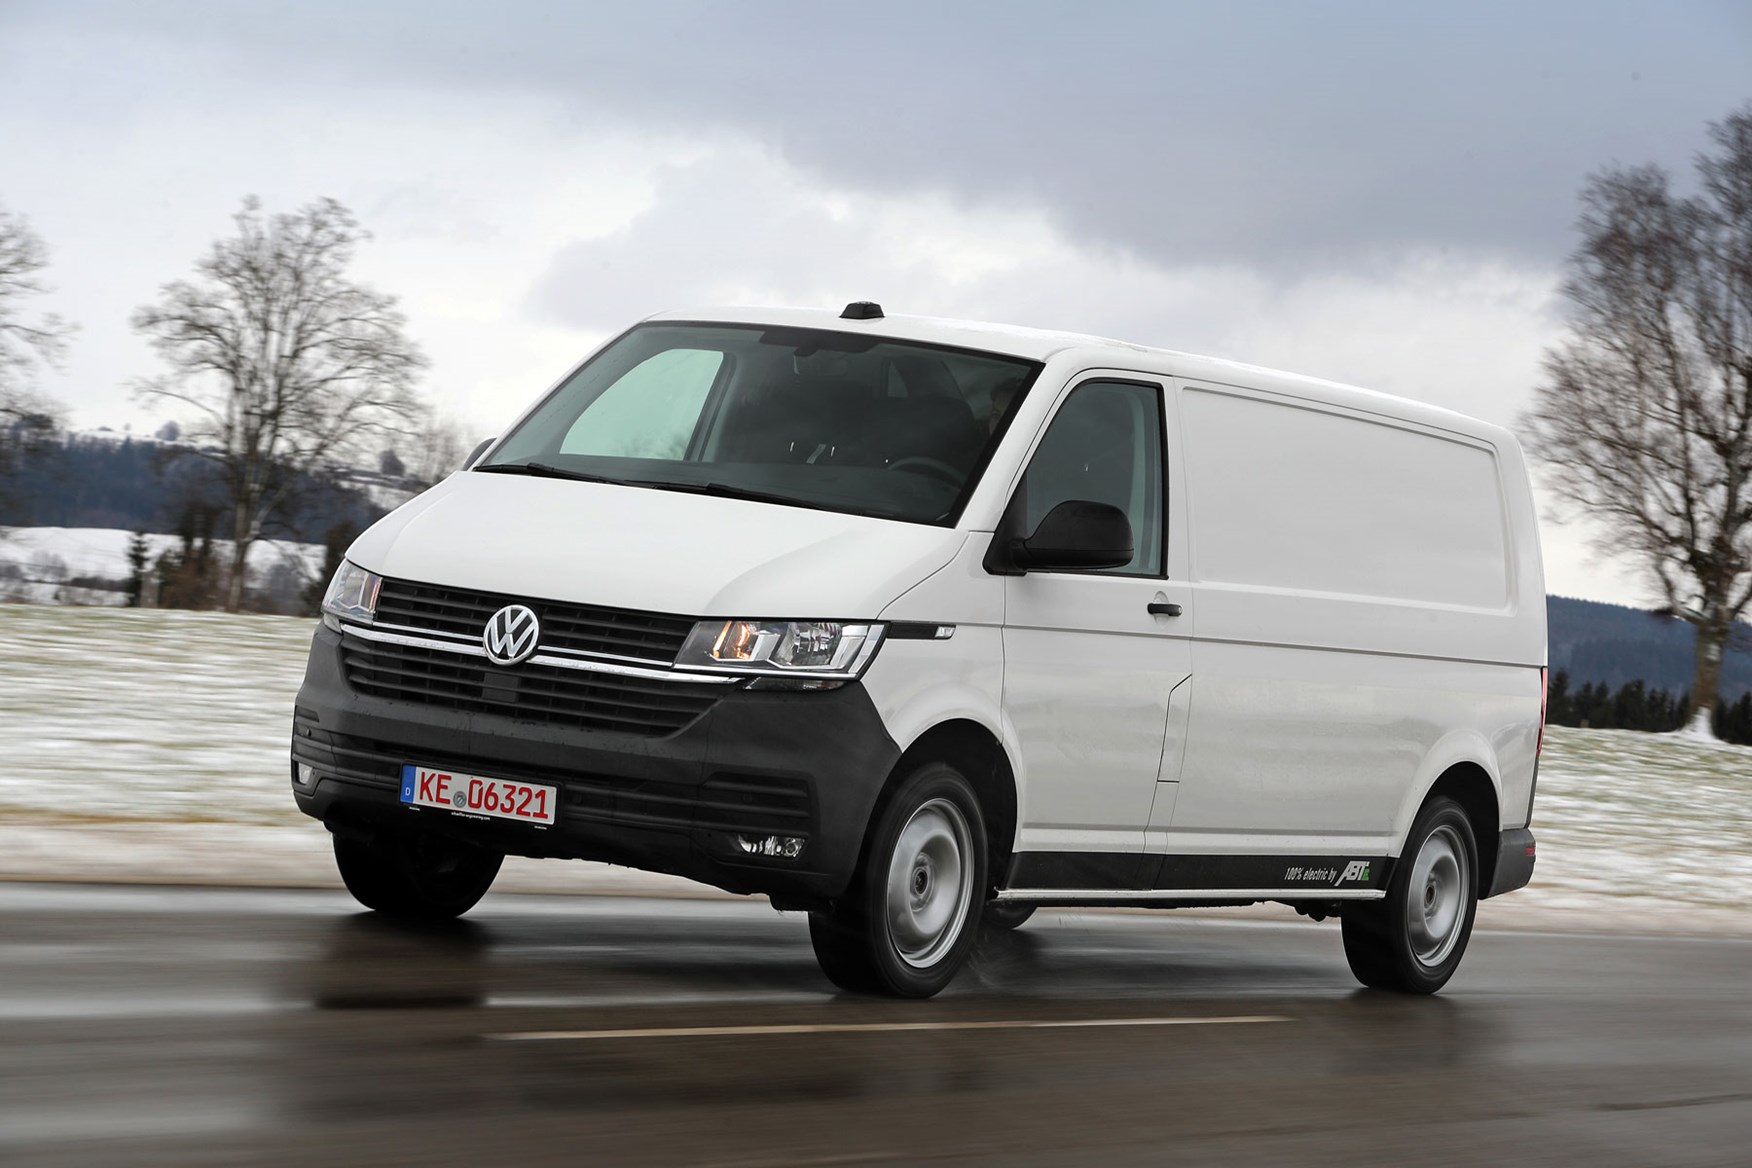 Volkswagen E Transporter Electric Van Uk Pricing And Specification Confirmed Parkers